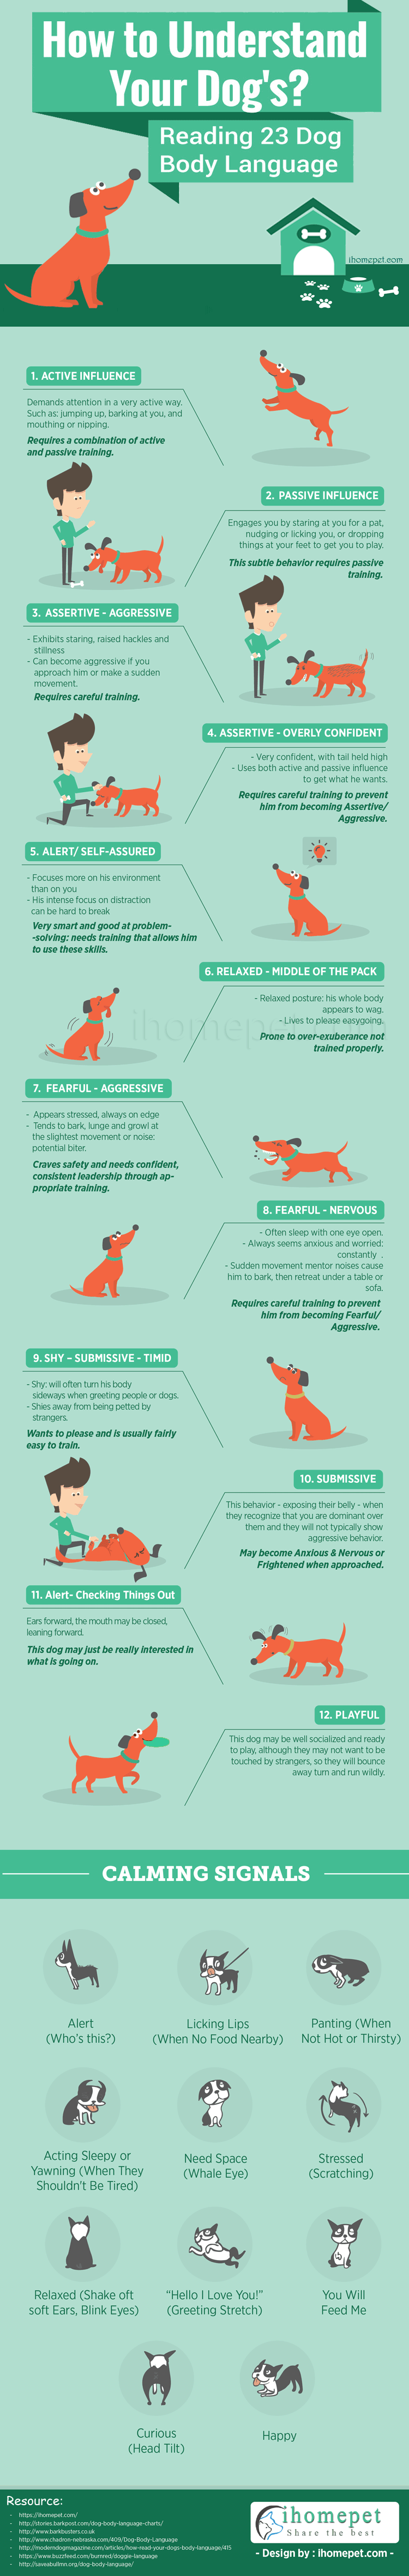 Understand Your Dog – Read 23 Dog Body Language Cues [Infographic]